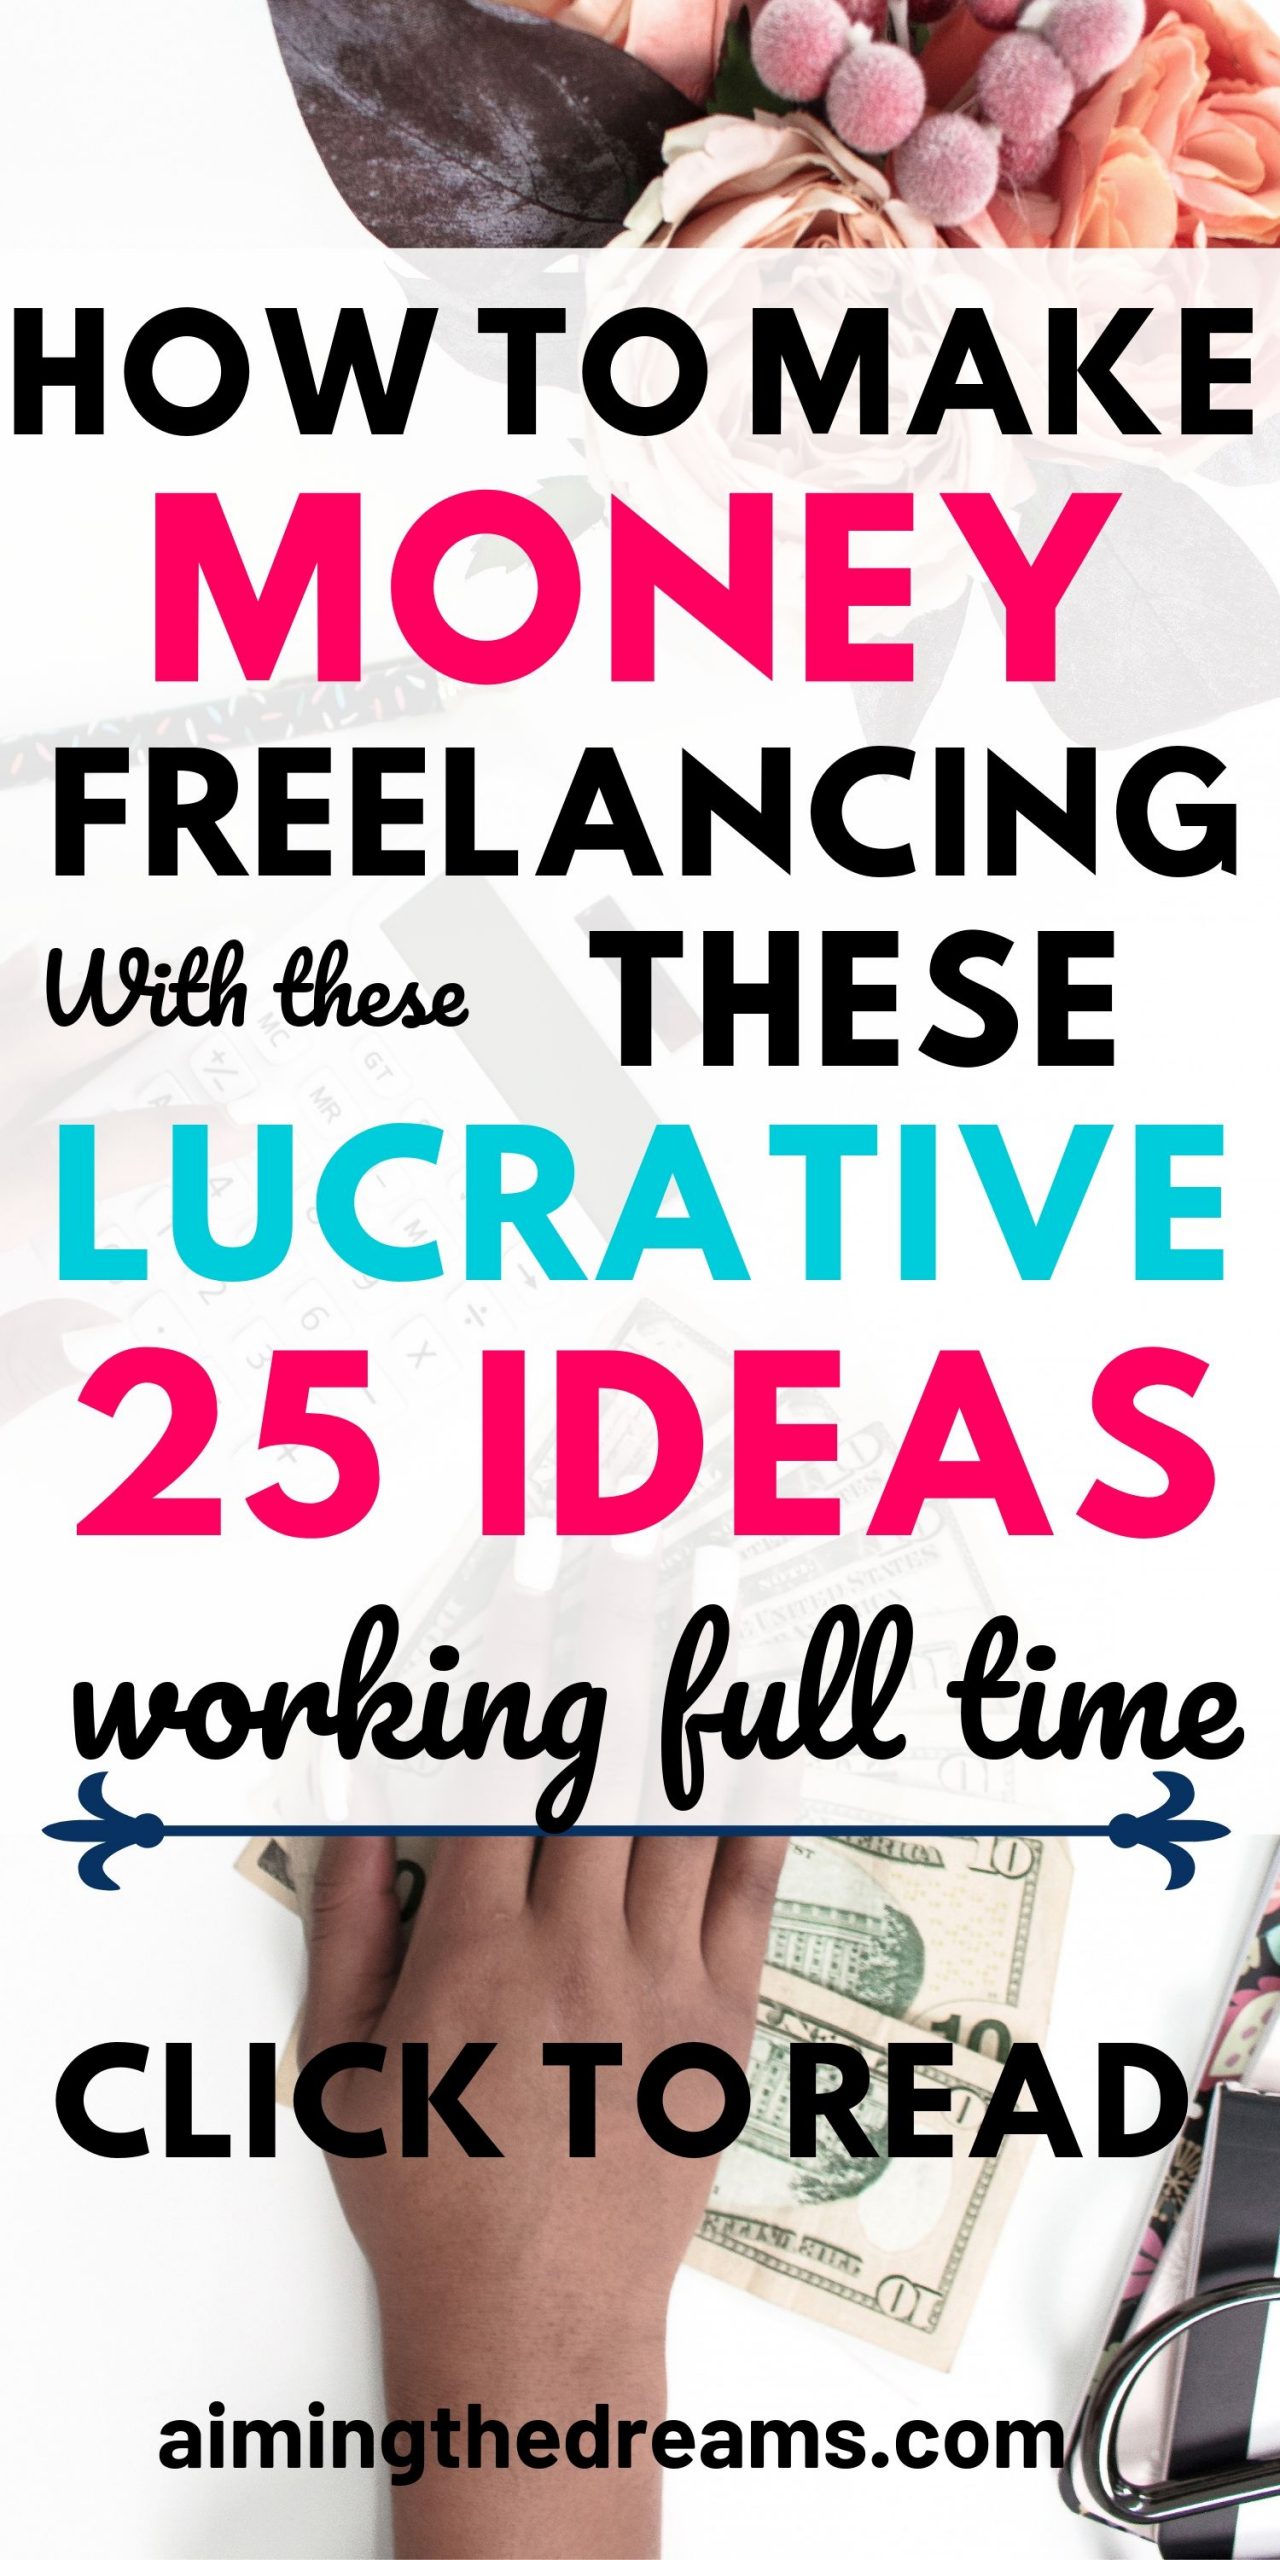 25 freelance work ideas to make money while working full time. Side hustle ideas let you work from home along with your full time work.